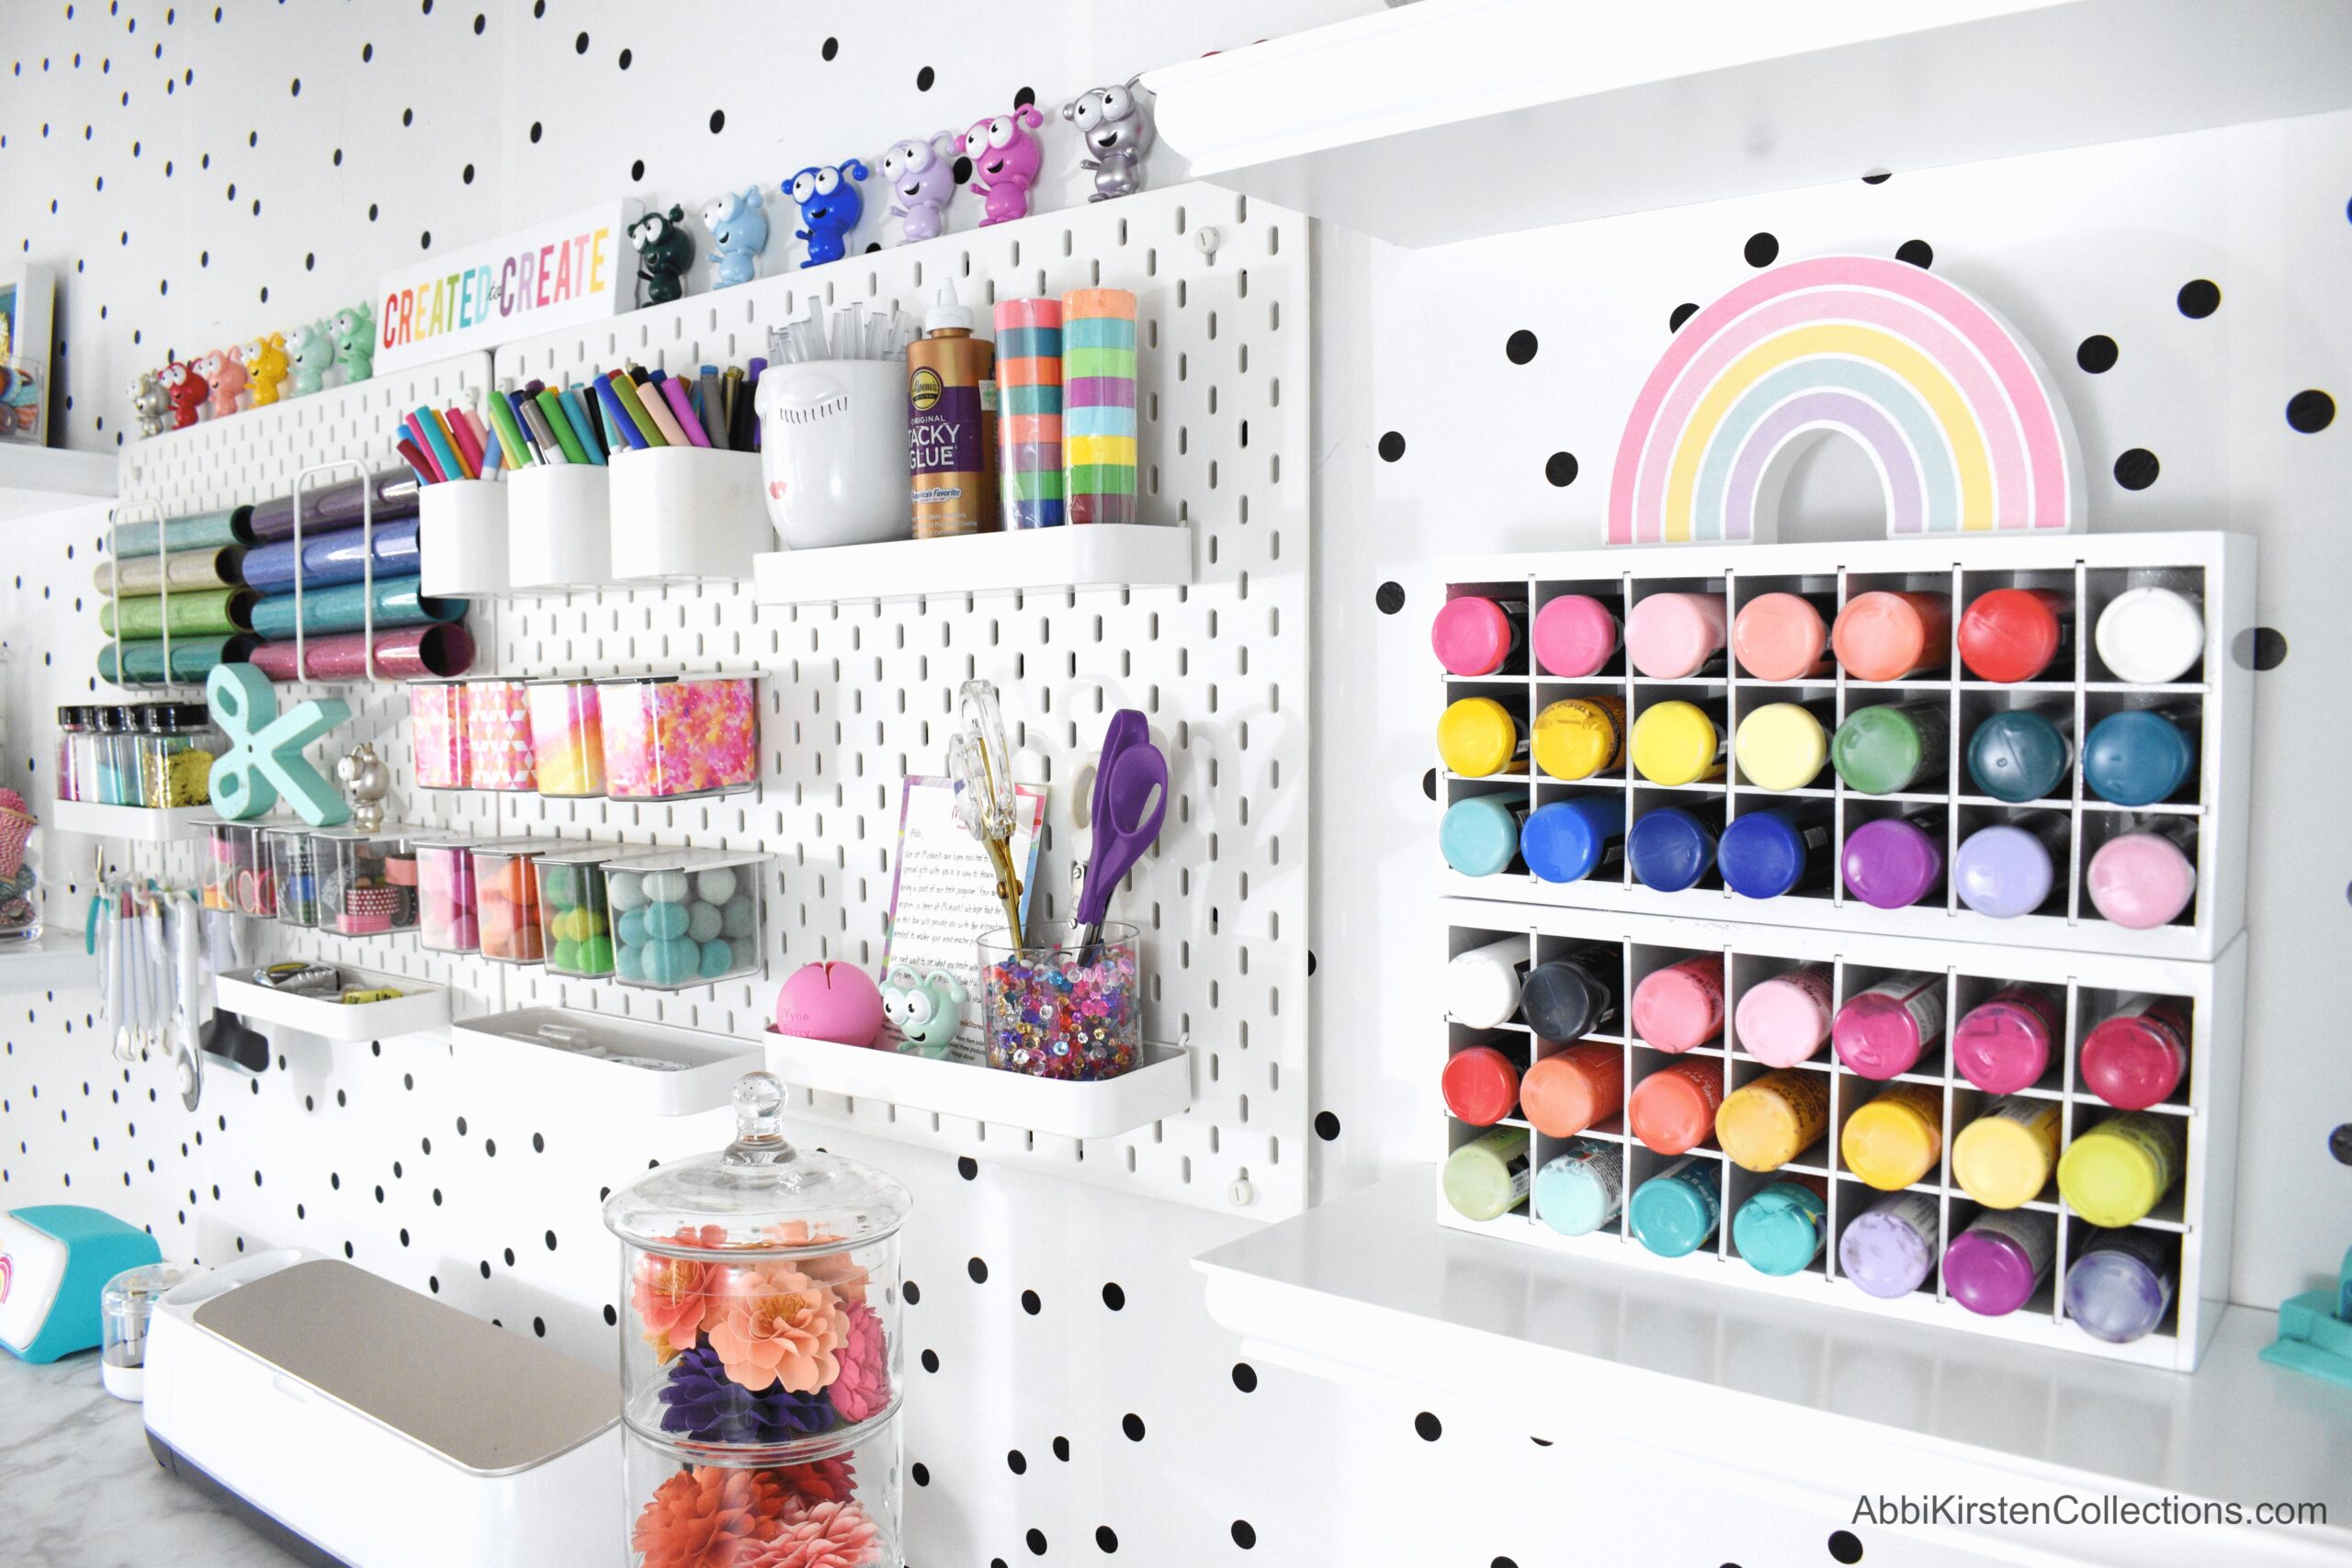 A polka-dot accented wall has more wall organizers to hold multiple craft supplies.